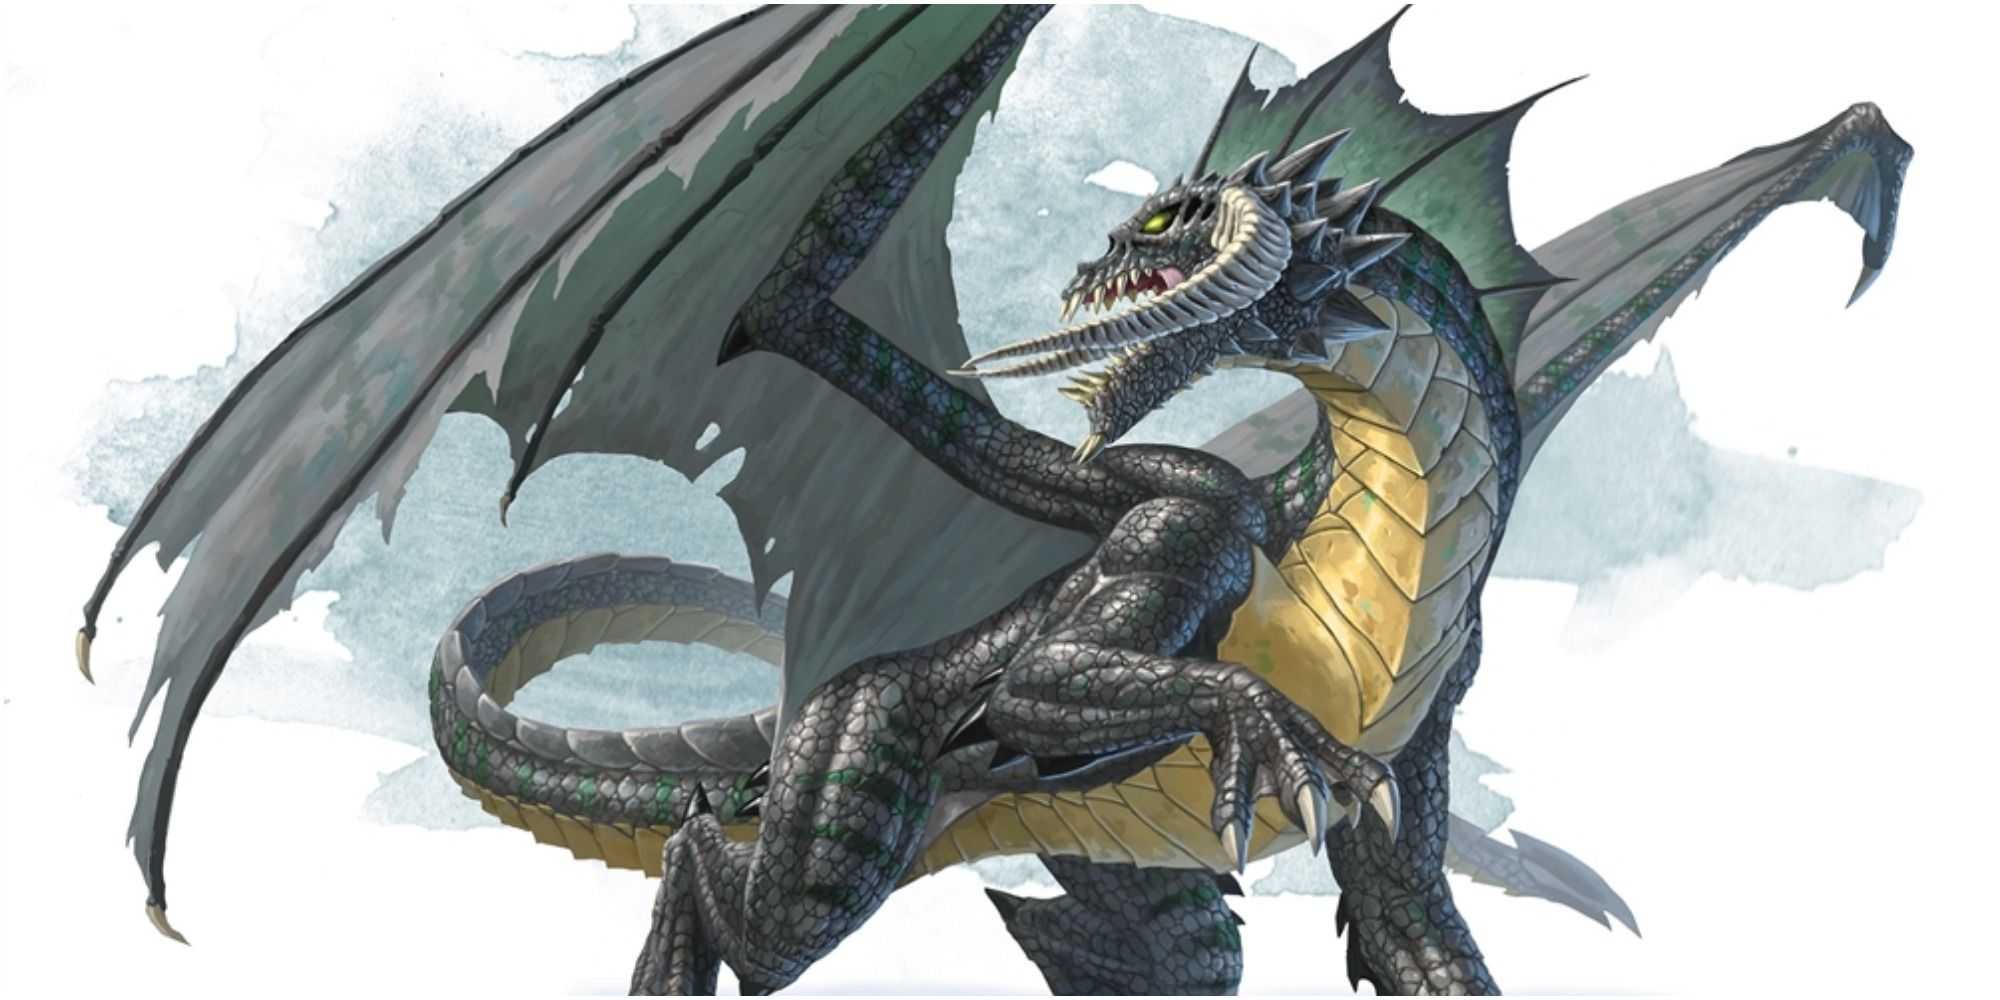 An image of an Ancient Black Dragon in DnD